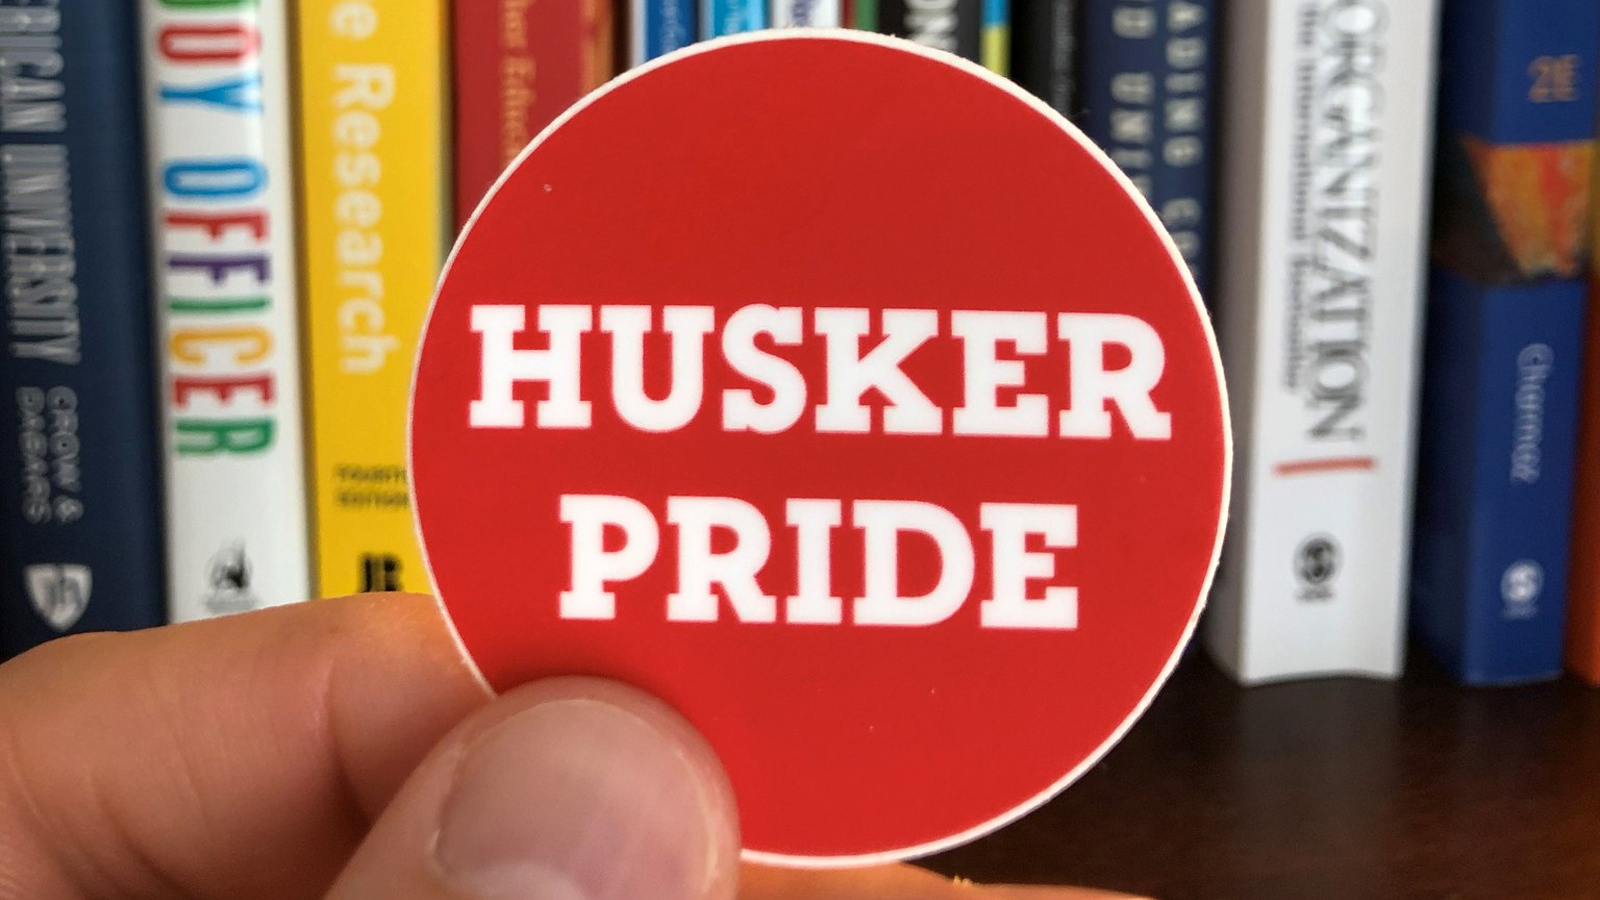 Jordan Gonzales showed his Husker pride and excitement about the NU Foundation's Glow Big Red fundraising event on Feb. 17-18. Learn more at https://go.unl.edu/gfv9.